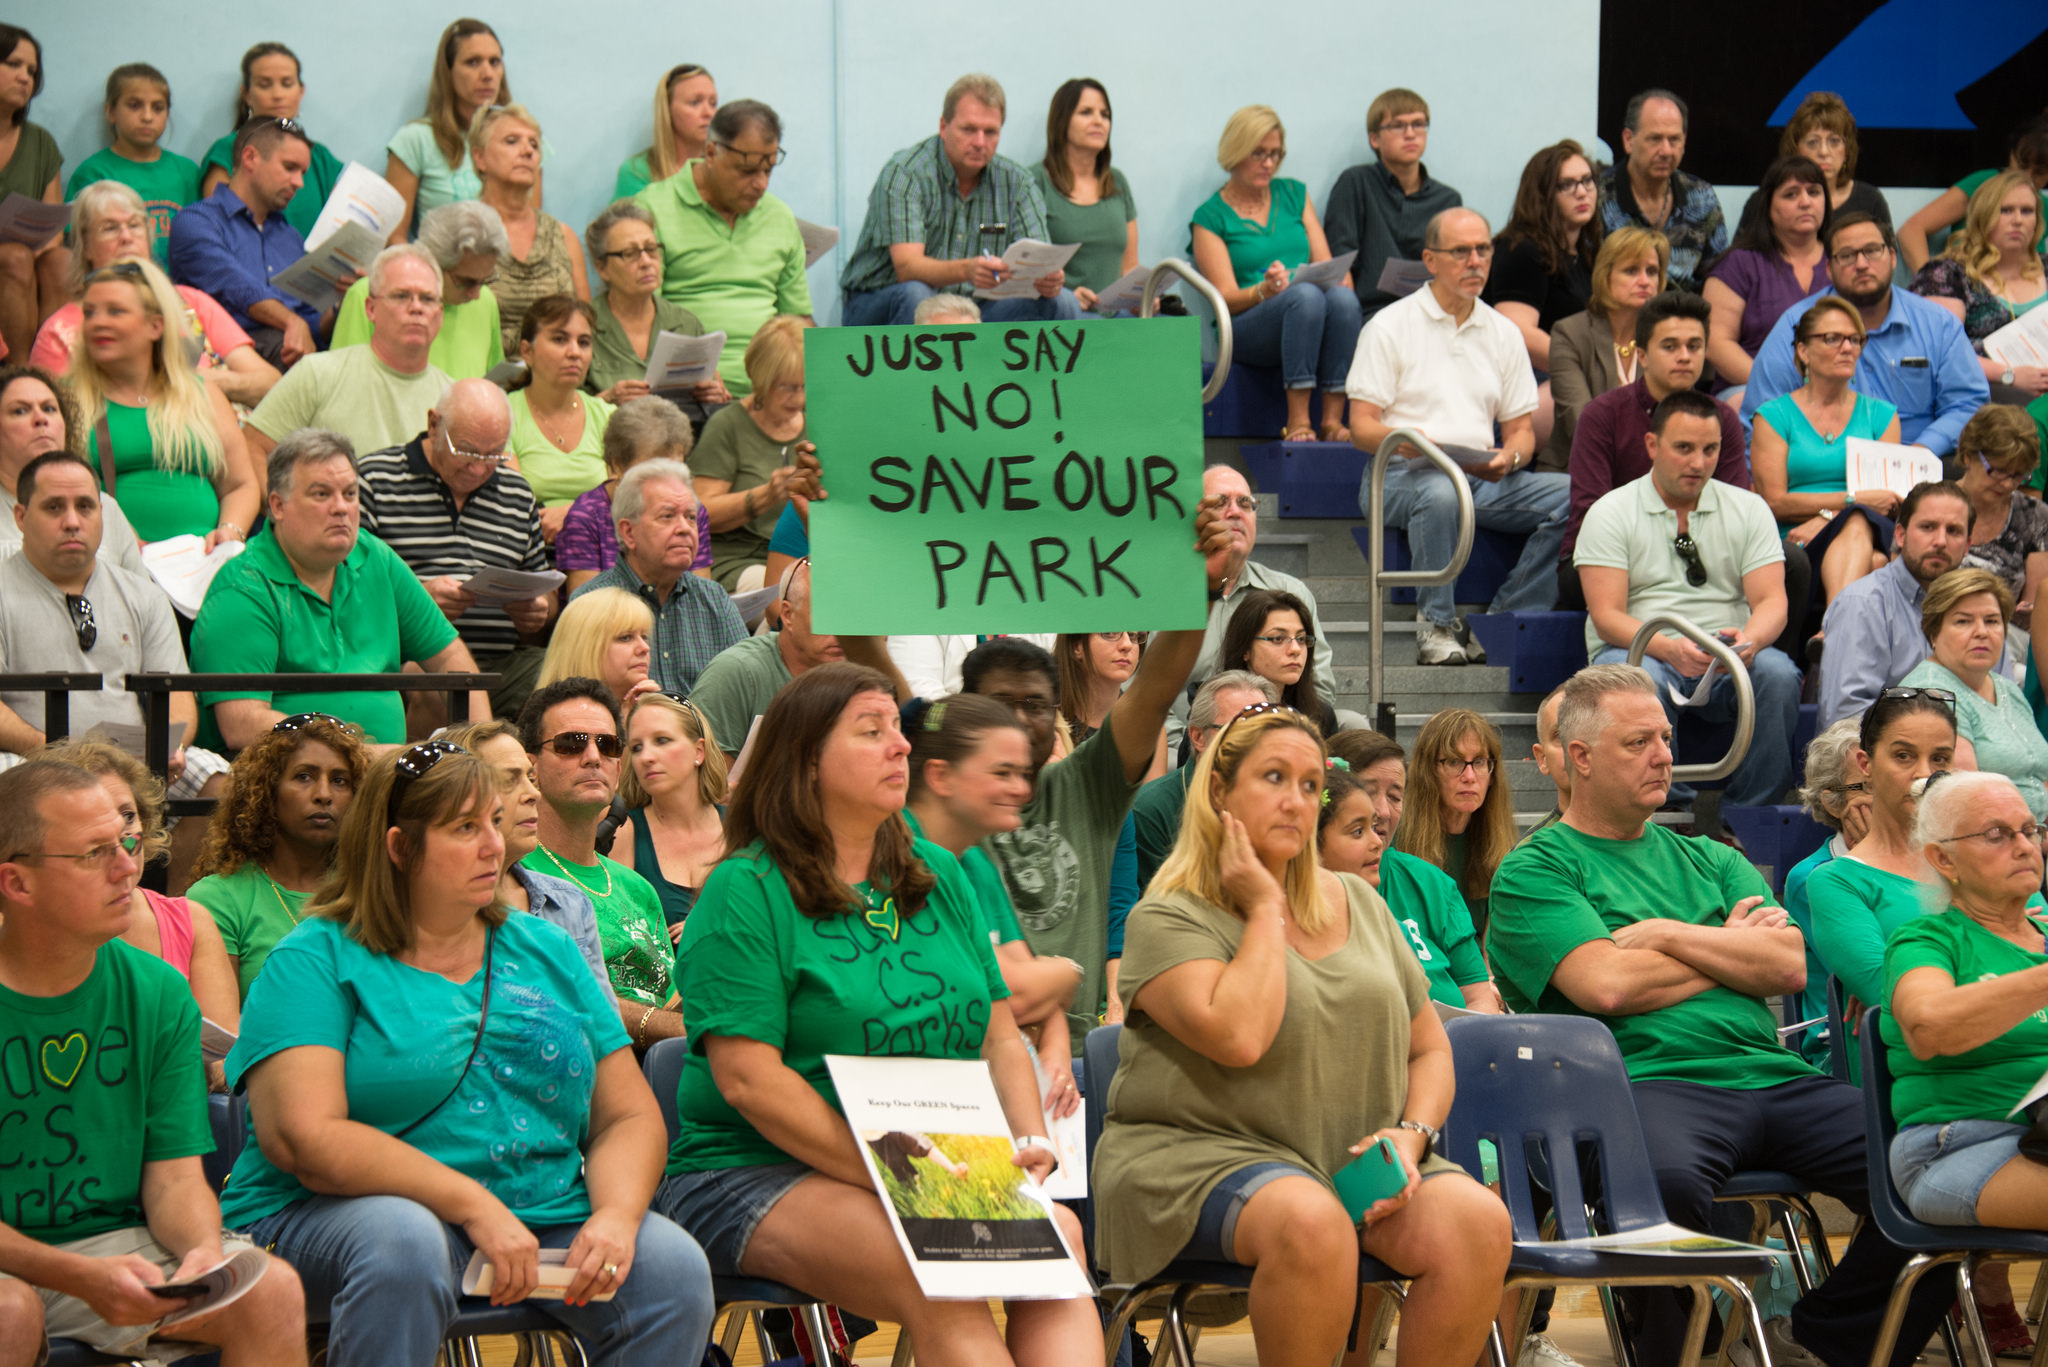 Residents Turn Out to Protest Proposed Charter School Move to Public Park